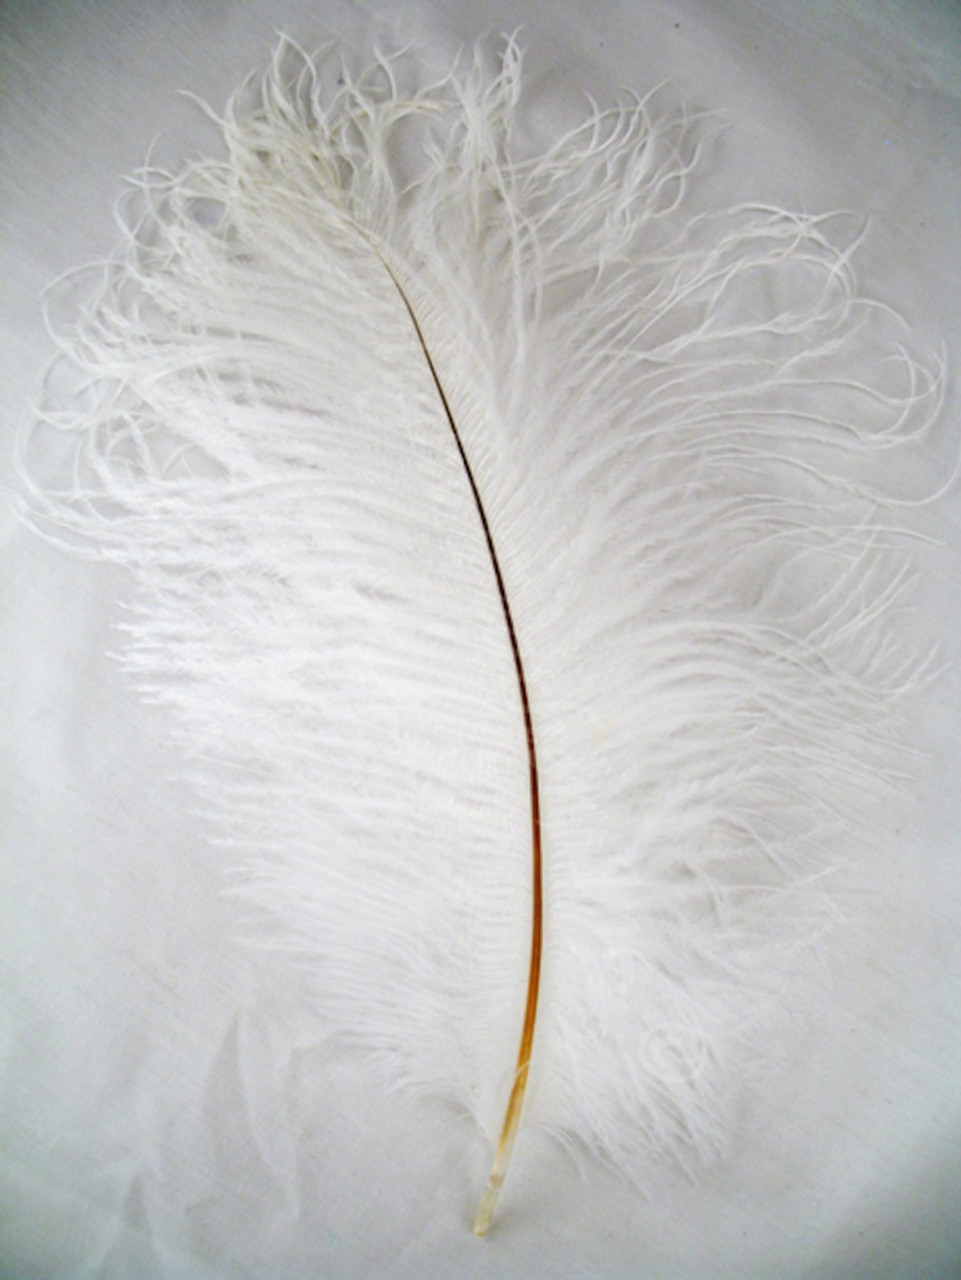 12 inch ostrich feathers